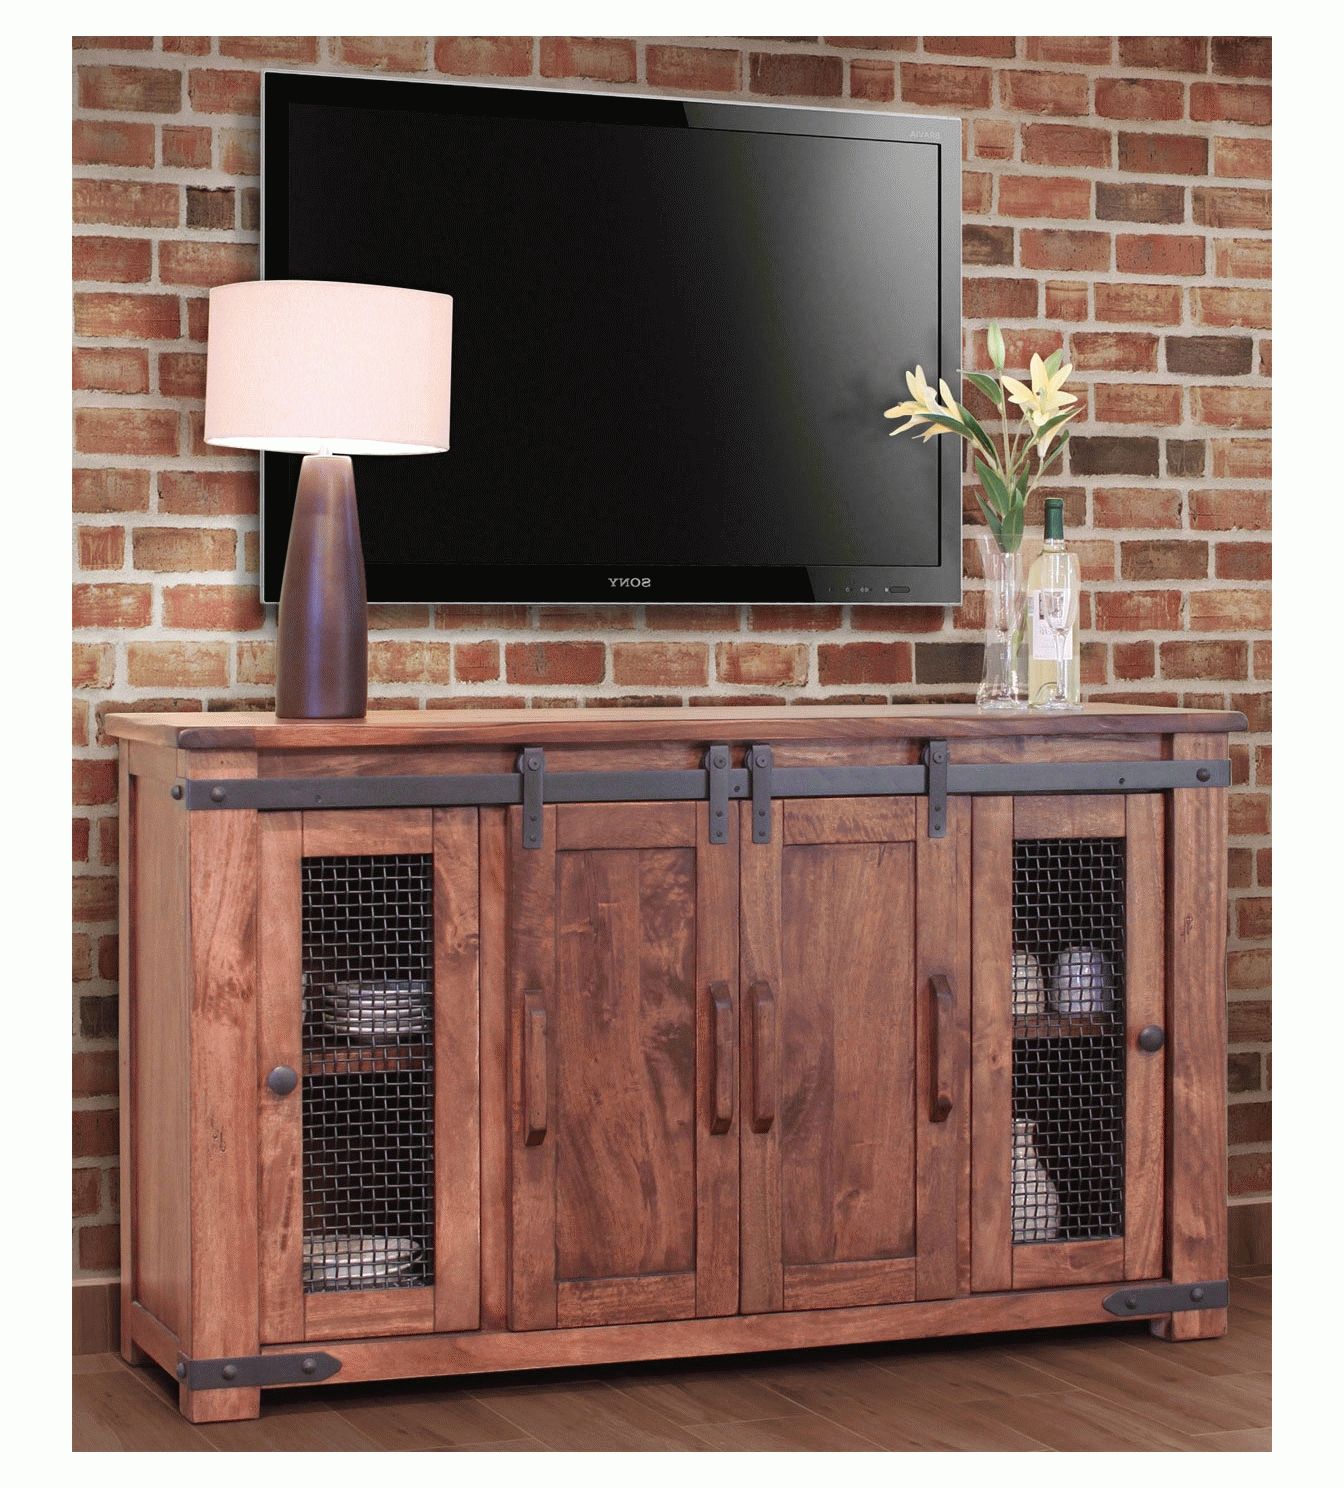 Rustic Barn Door Tv Stand, Barn Door Tv Stand, Barn Door Tv Console For Cabinet Tv Stands (View 5 of 15)